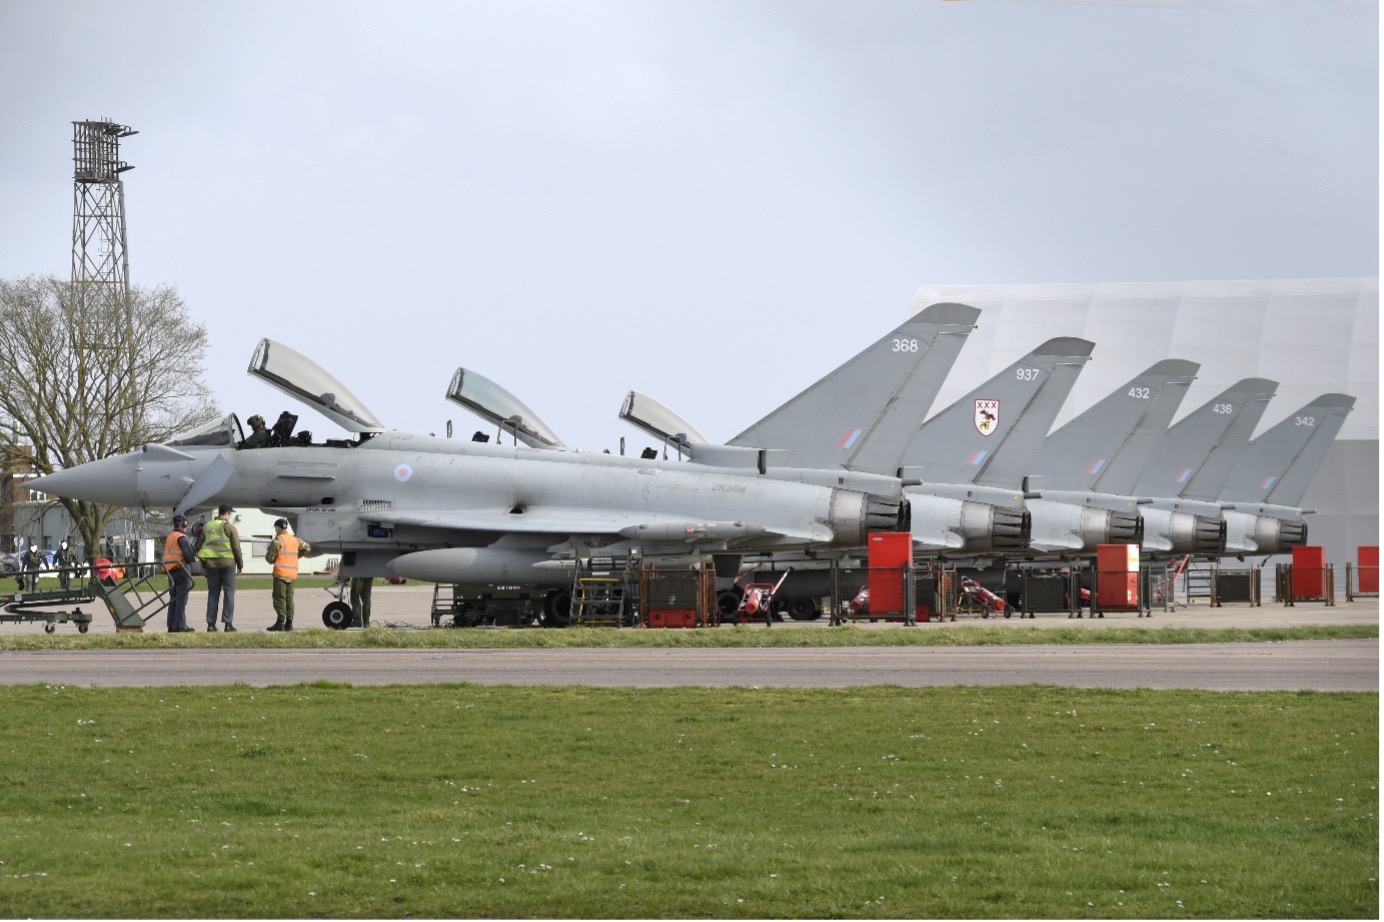 Air Power in the Age of Conflict: The Need For Credible UK Capability